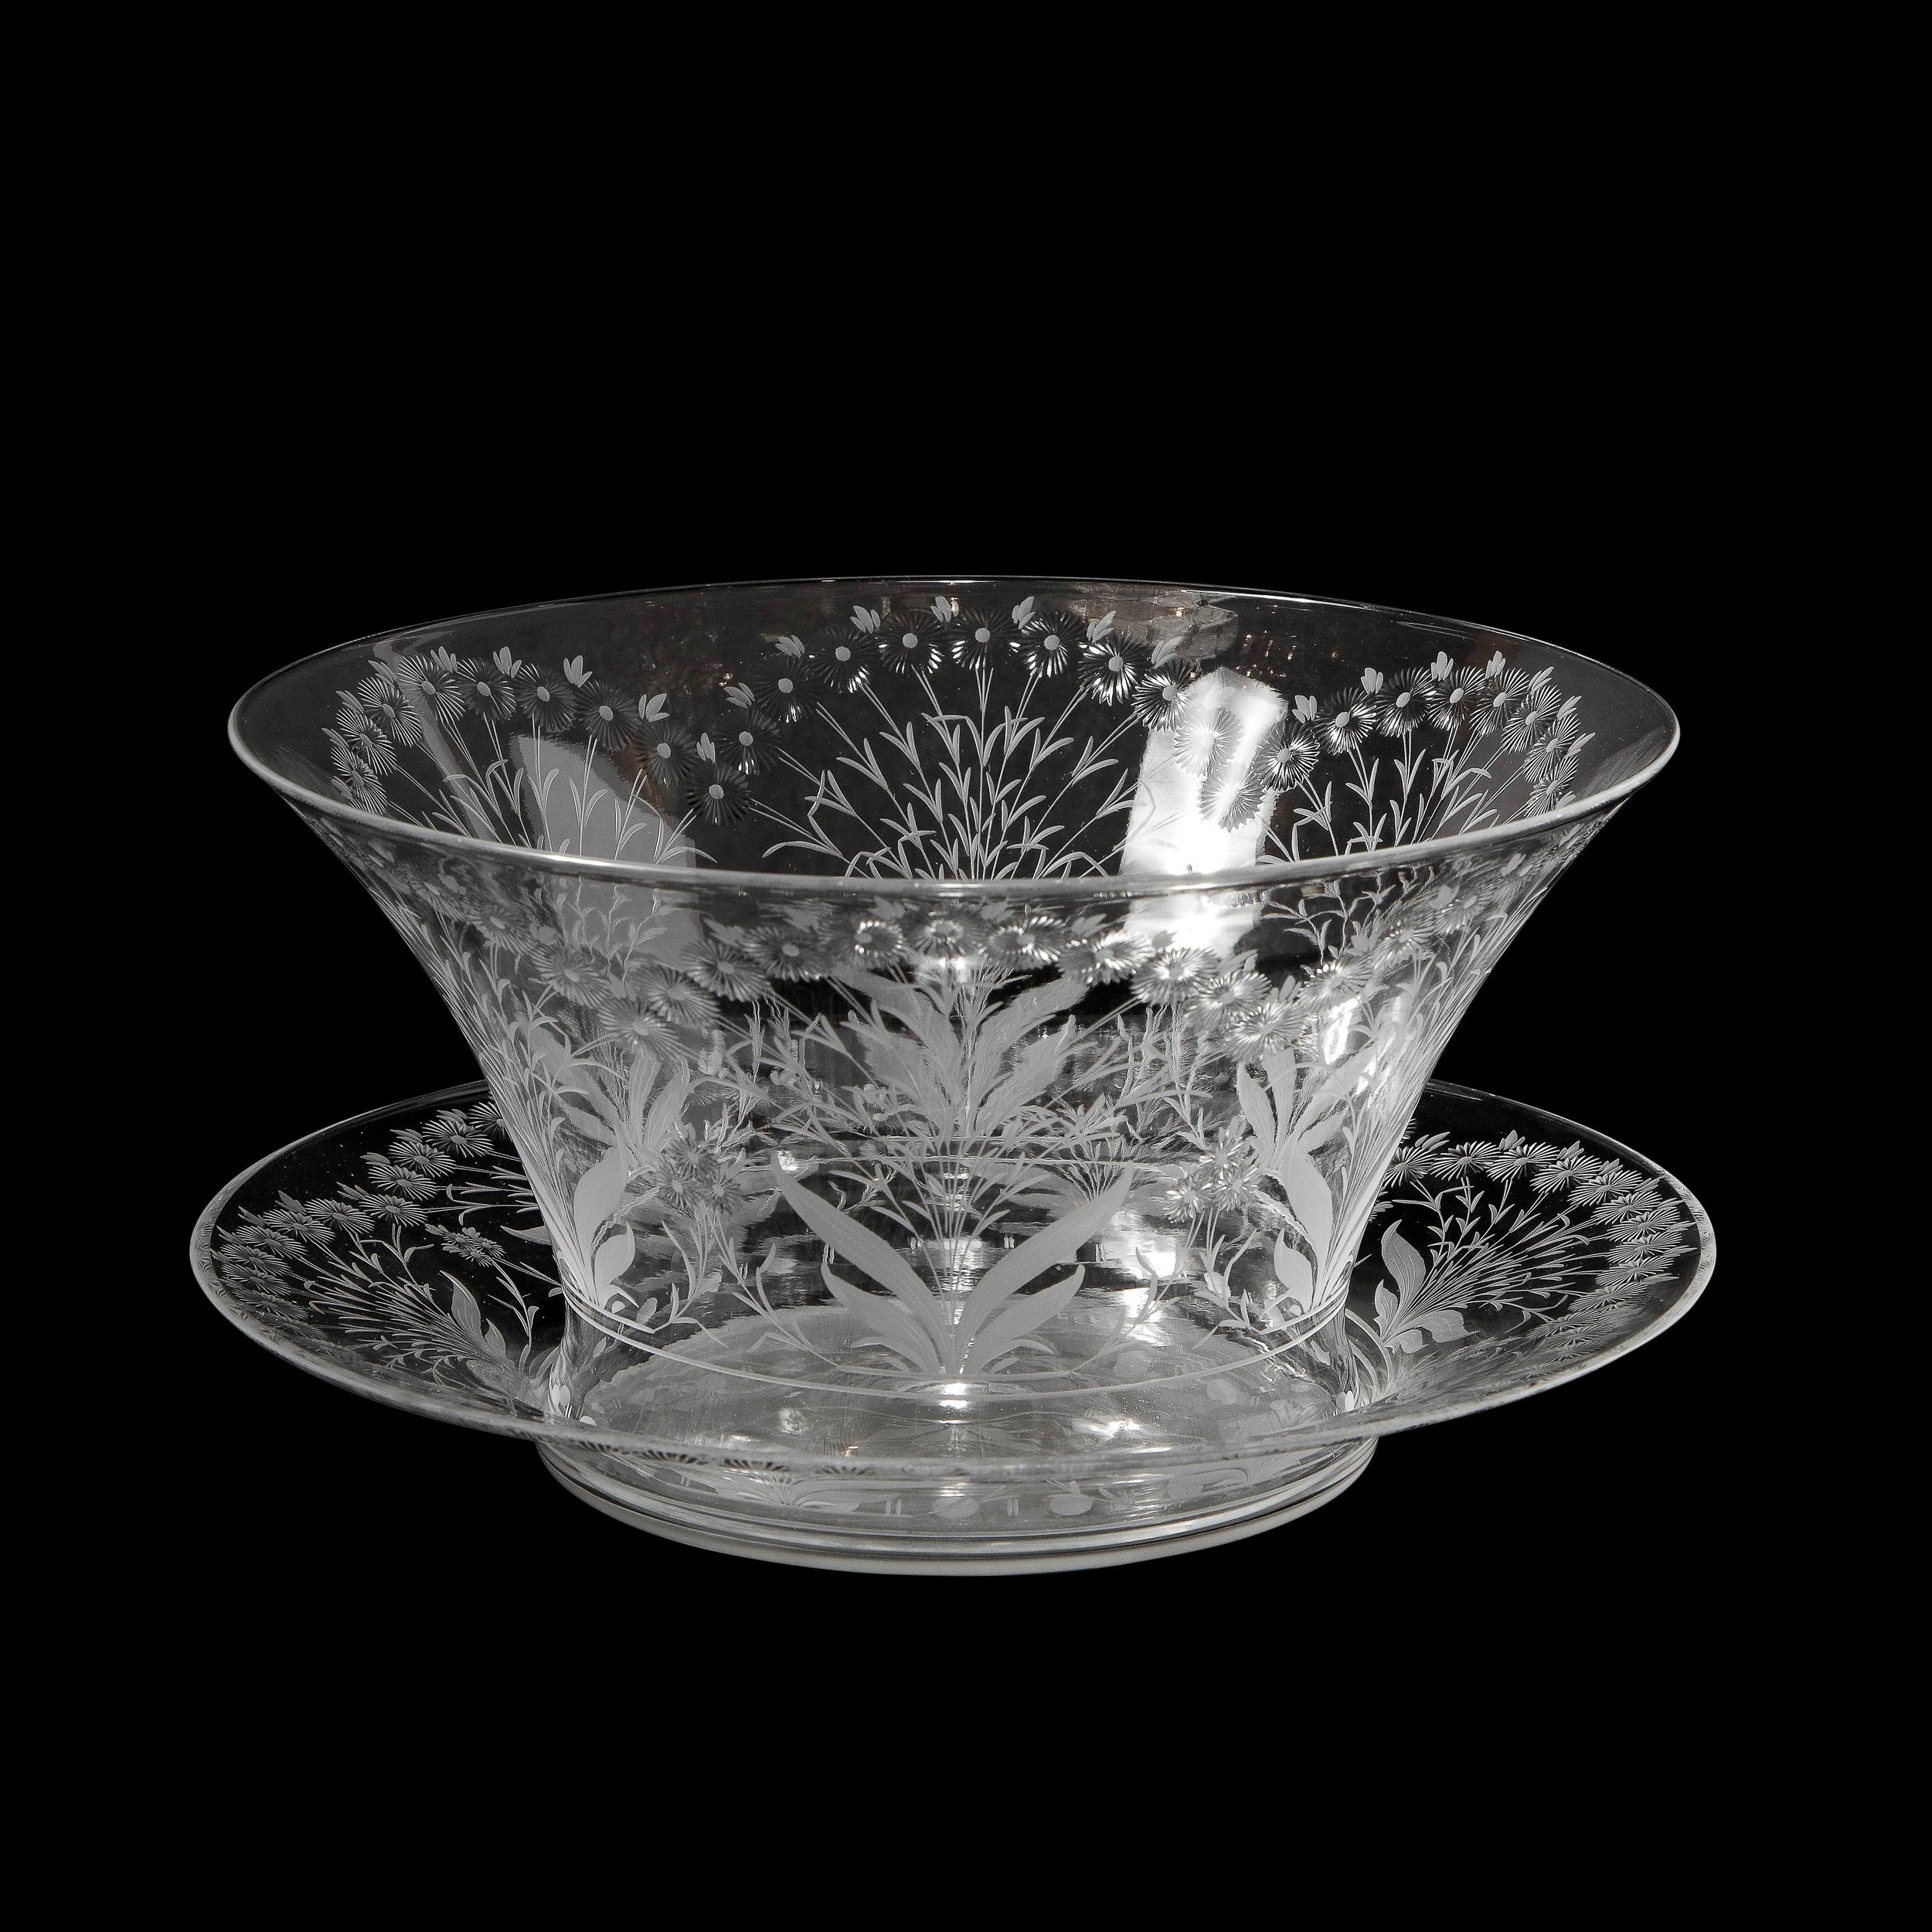 This beautiful Mid-Century Modern bowl with serving dish was realized by the esteemed maker Kosta Boda in Sweden, circa 1960. It features a conical form with a flared circular mouth in translucent glass with frosted foliate designs and etched